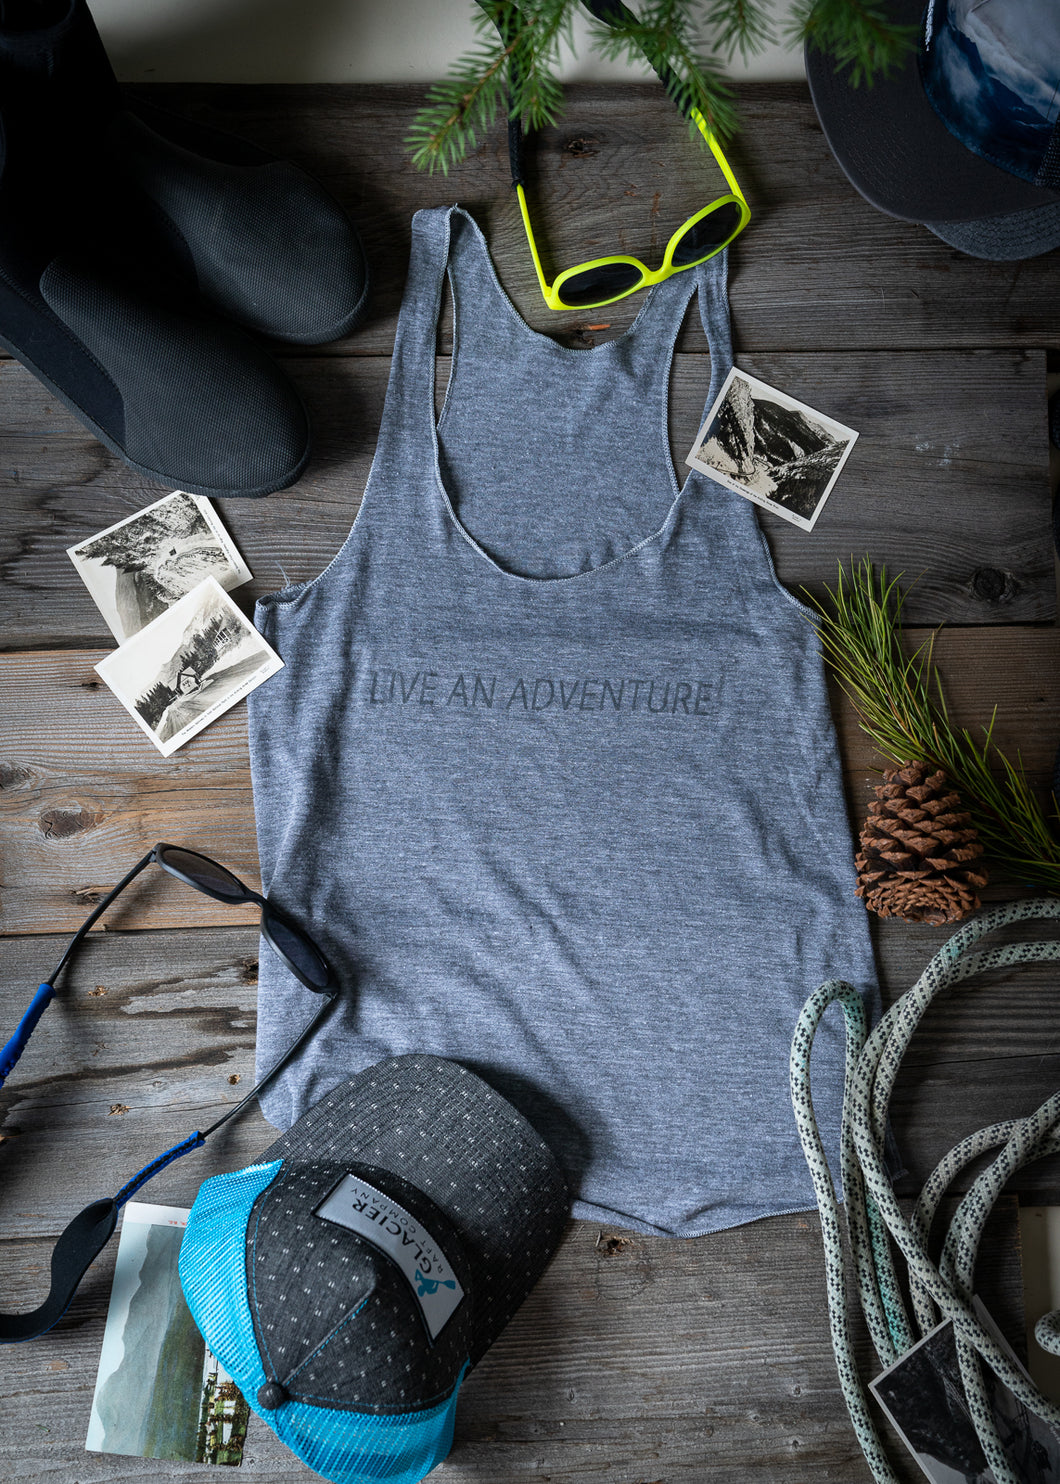 Live an Adventure tank top in grey